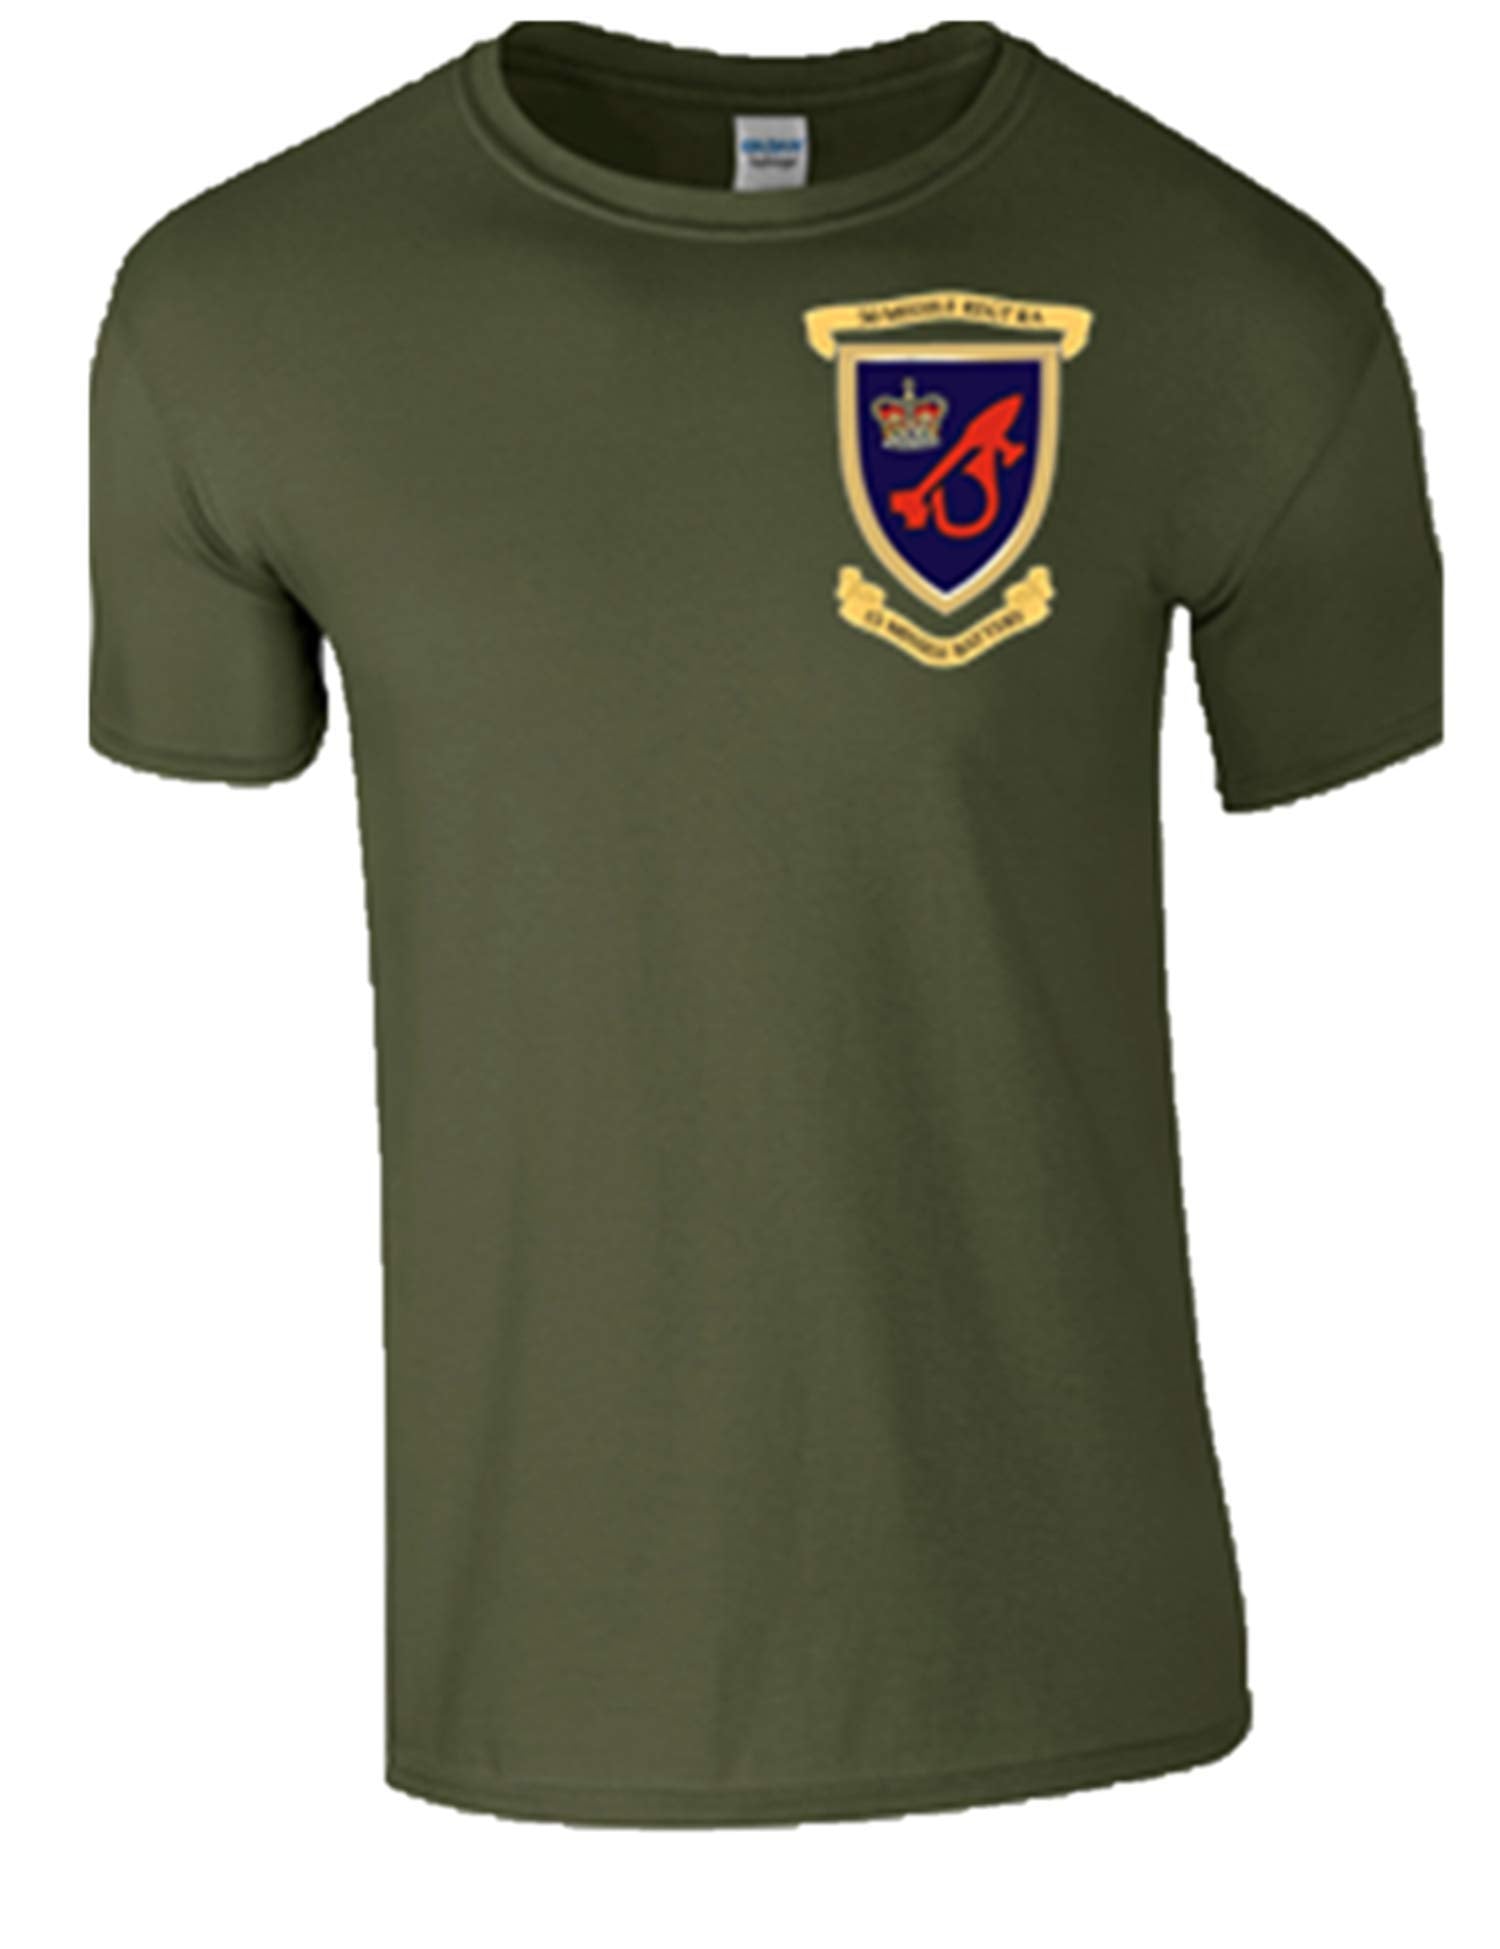 Army 1157 Kit Ministry of Defence T-Shirt 50 Missile Regiment with 15 Battery RA Logo on - Army 1157 kit Green / M Army 1157 Kit